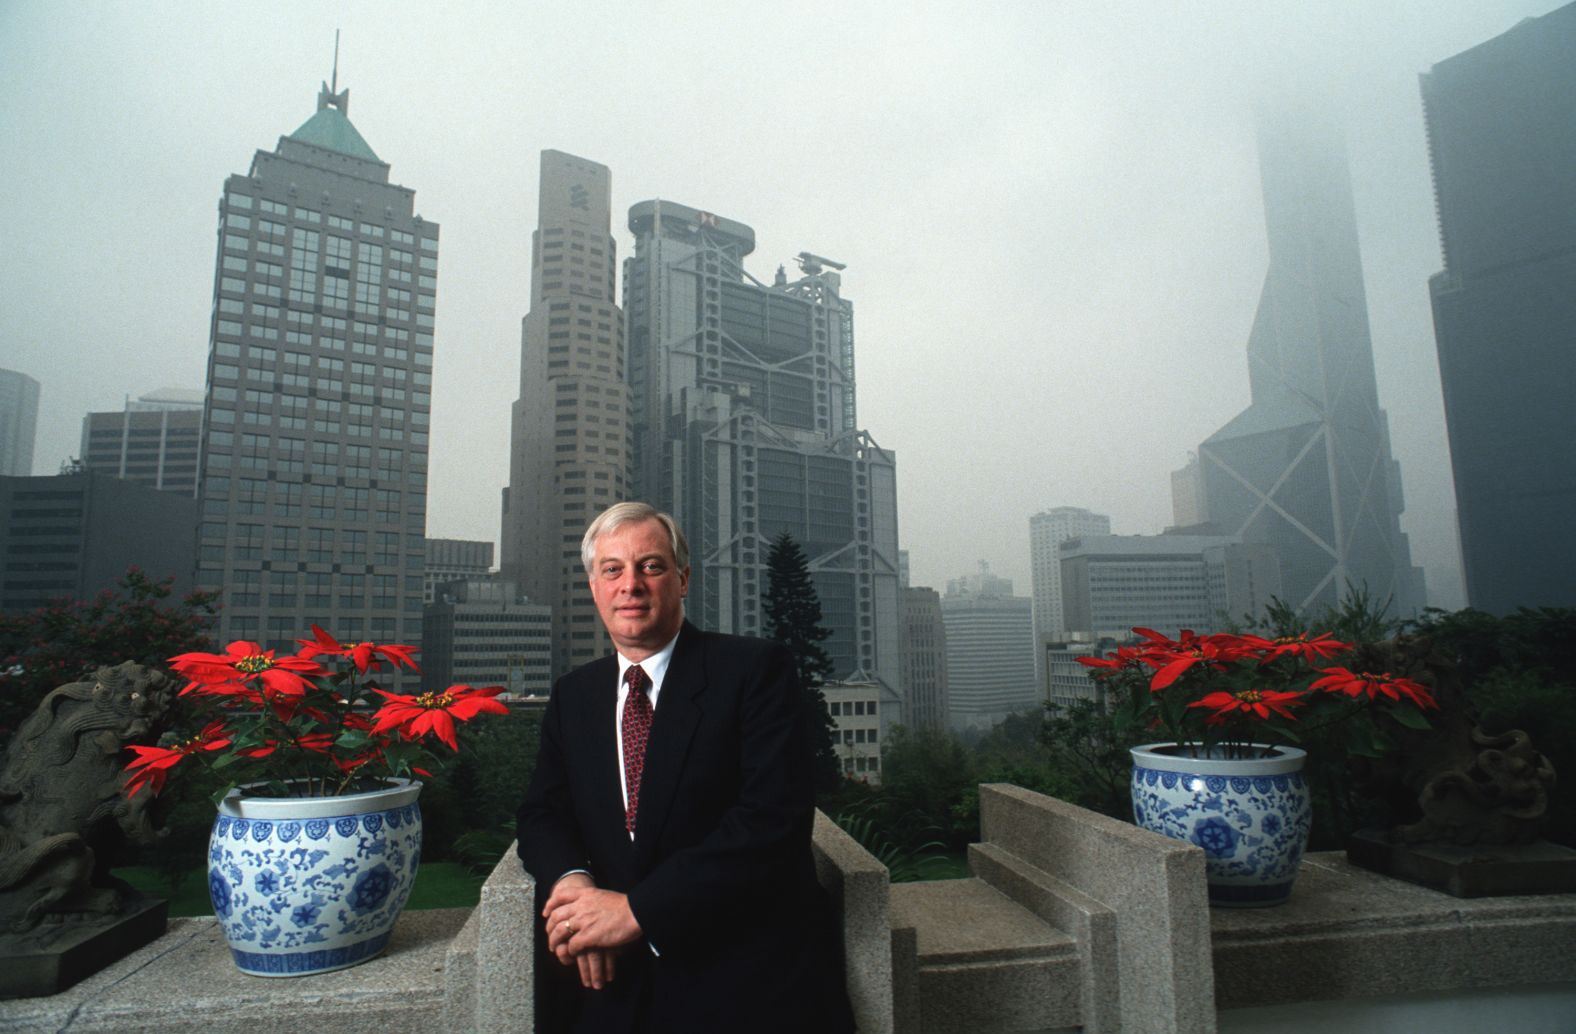 Chris Patten poses for a photo in 1993 at the Governor's House that overlooks central Hong Kong. Patten served as Great Britain's last colonial governor of Hong Kong from April 1992 until the handover of the city to China on July 1, 1997.